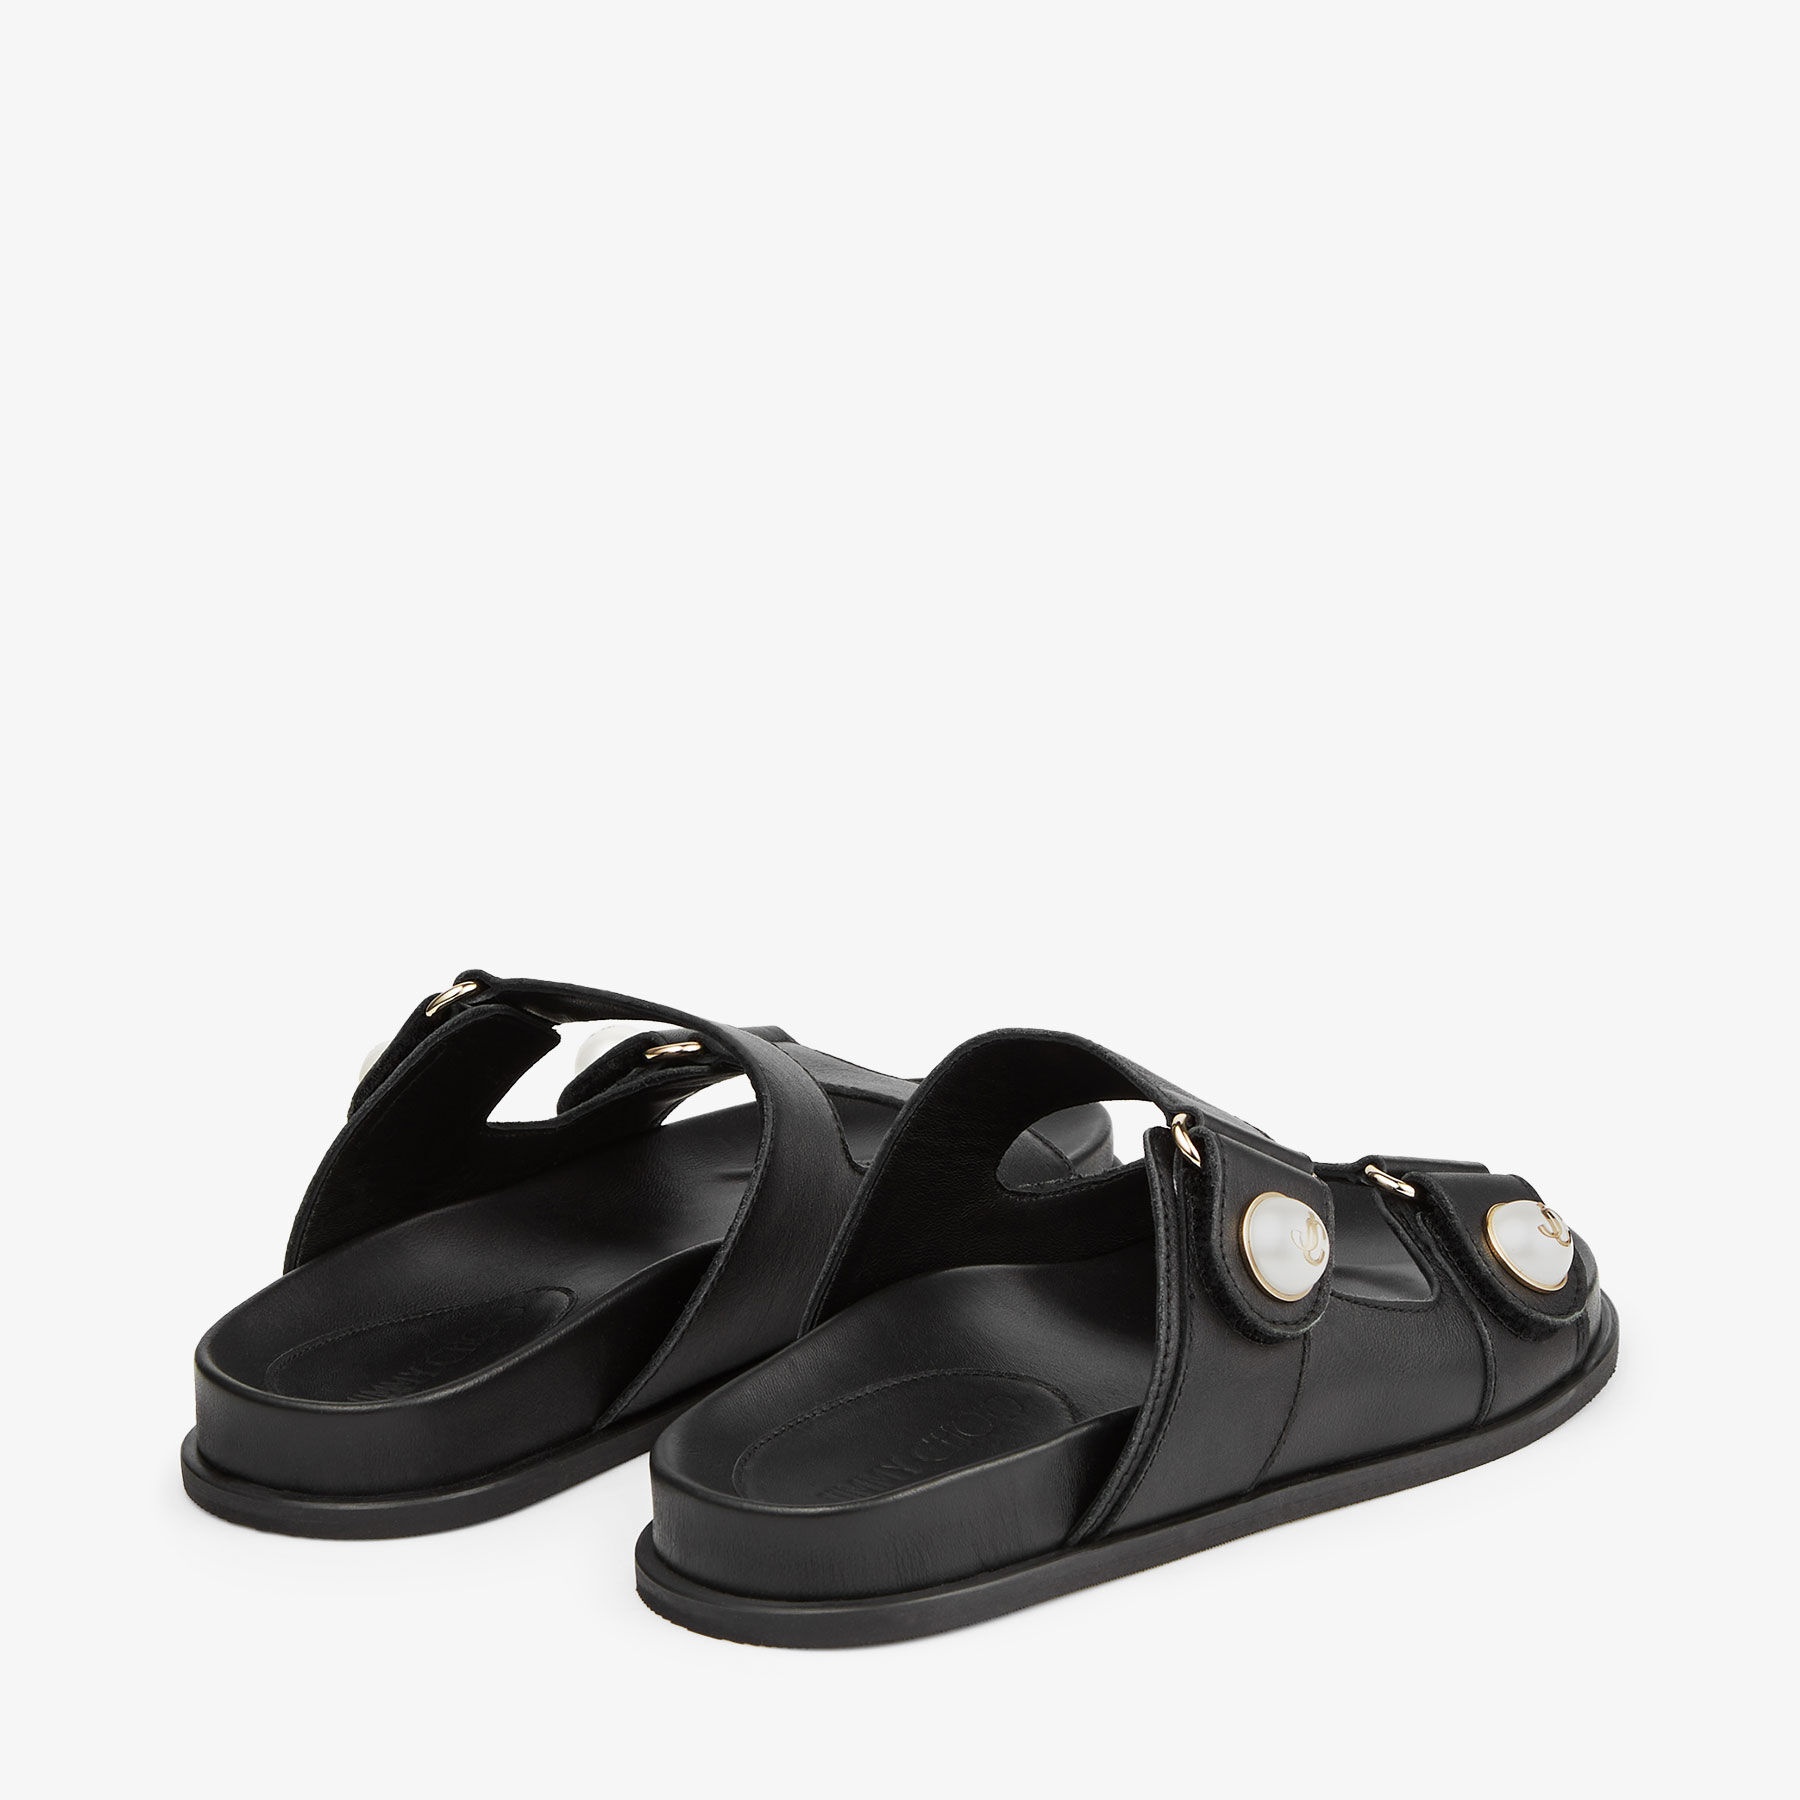 Fayence Sandal
Black Leather Flat Sandals with Pearl Embellishment - 7